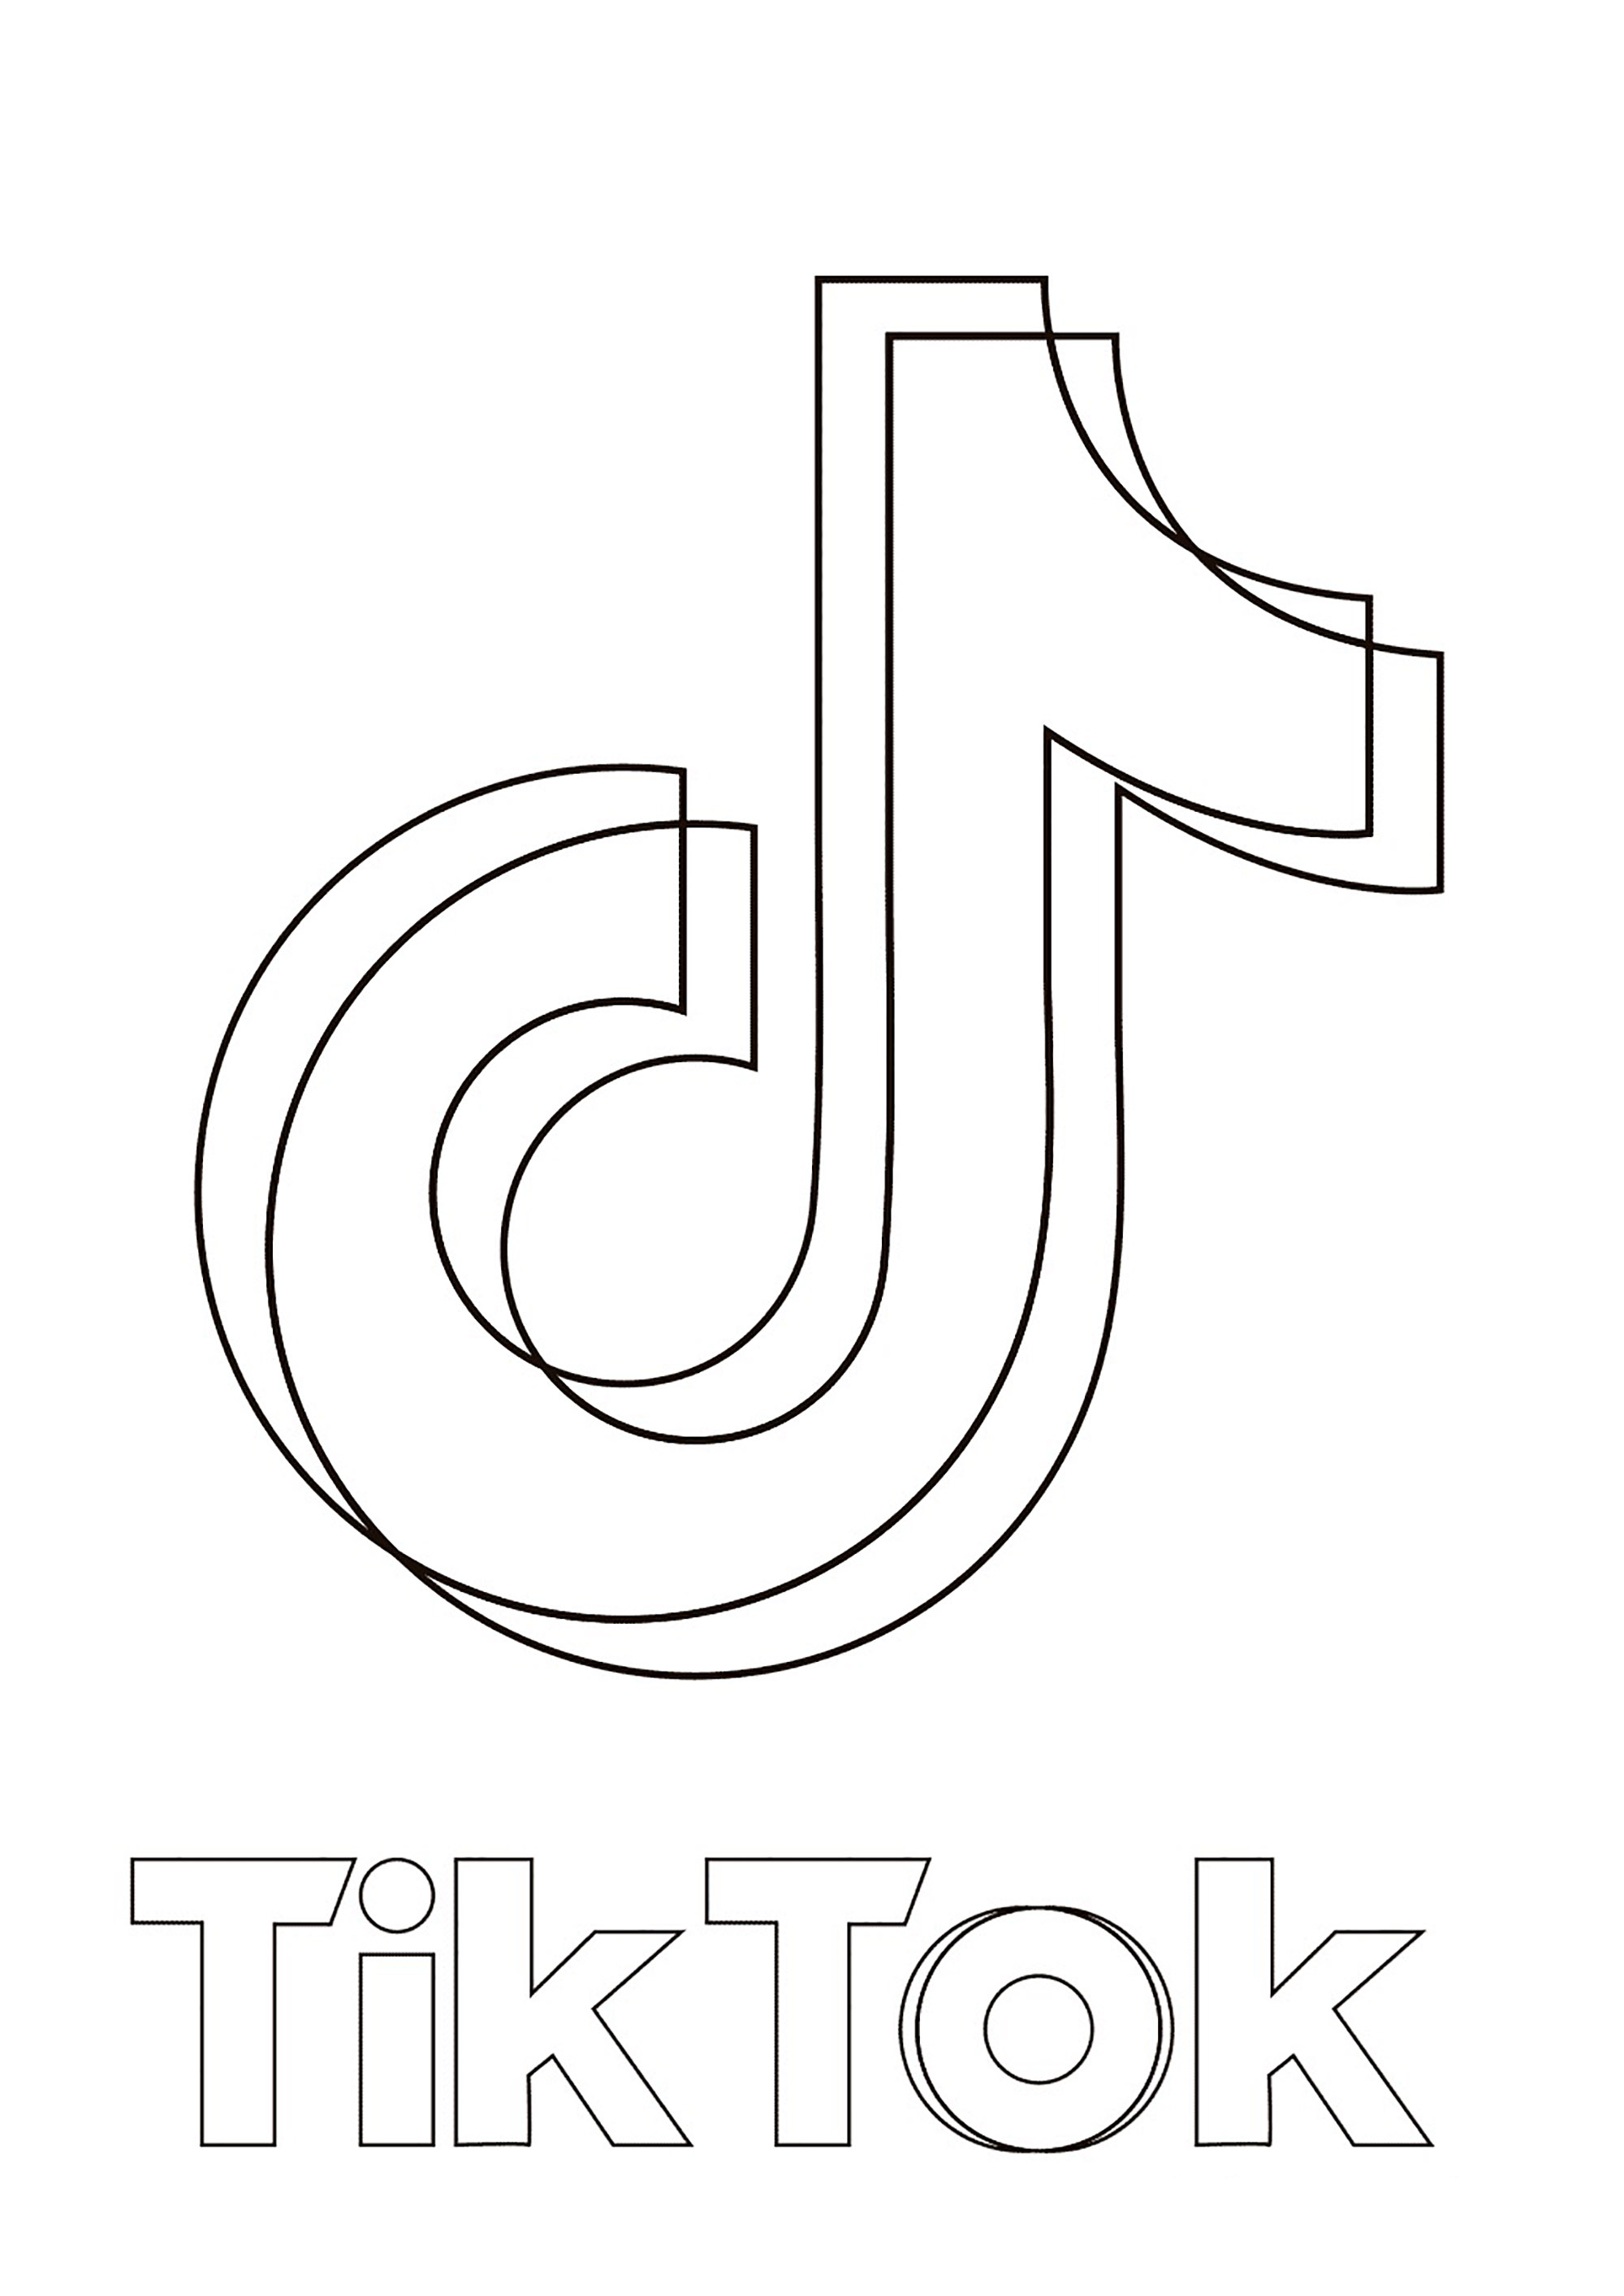 Logo of Tik Tok à colorier. Tik. Tok is a video-sharing and social networking mobile app launched in September 2016. It is developed by the Chinese company Byte. Dance